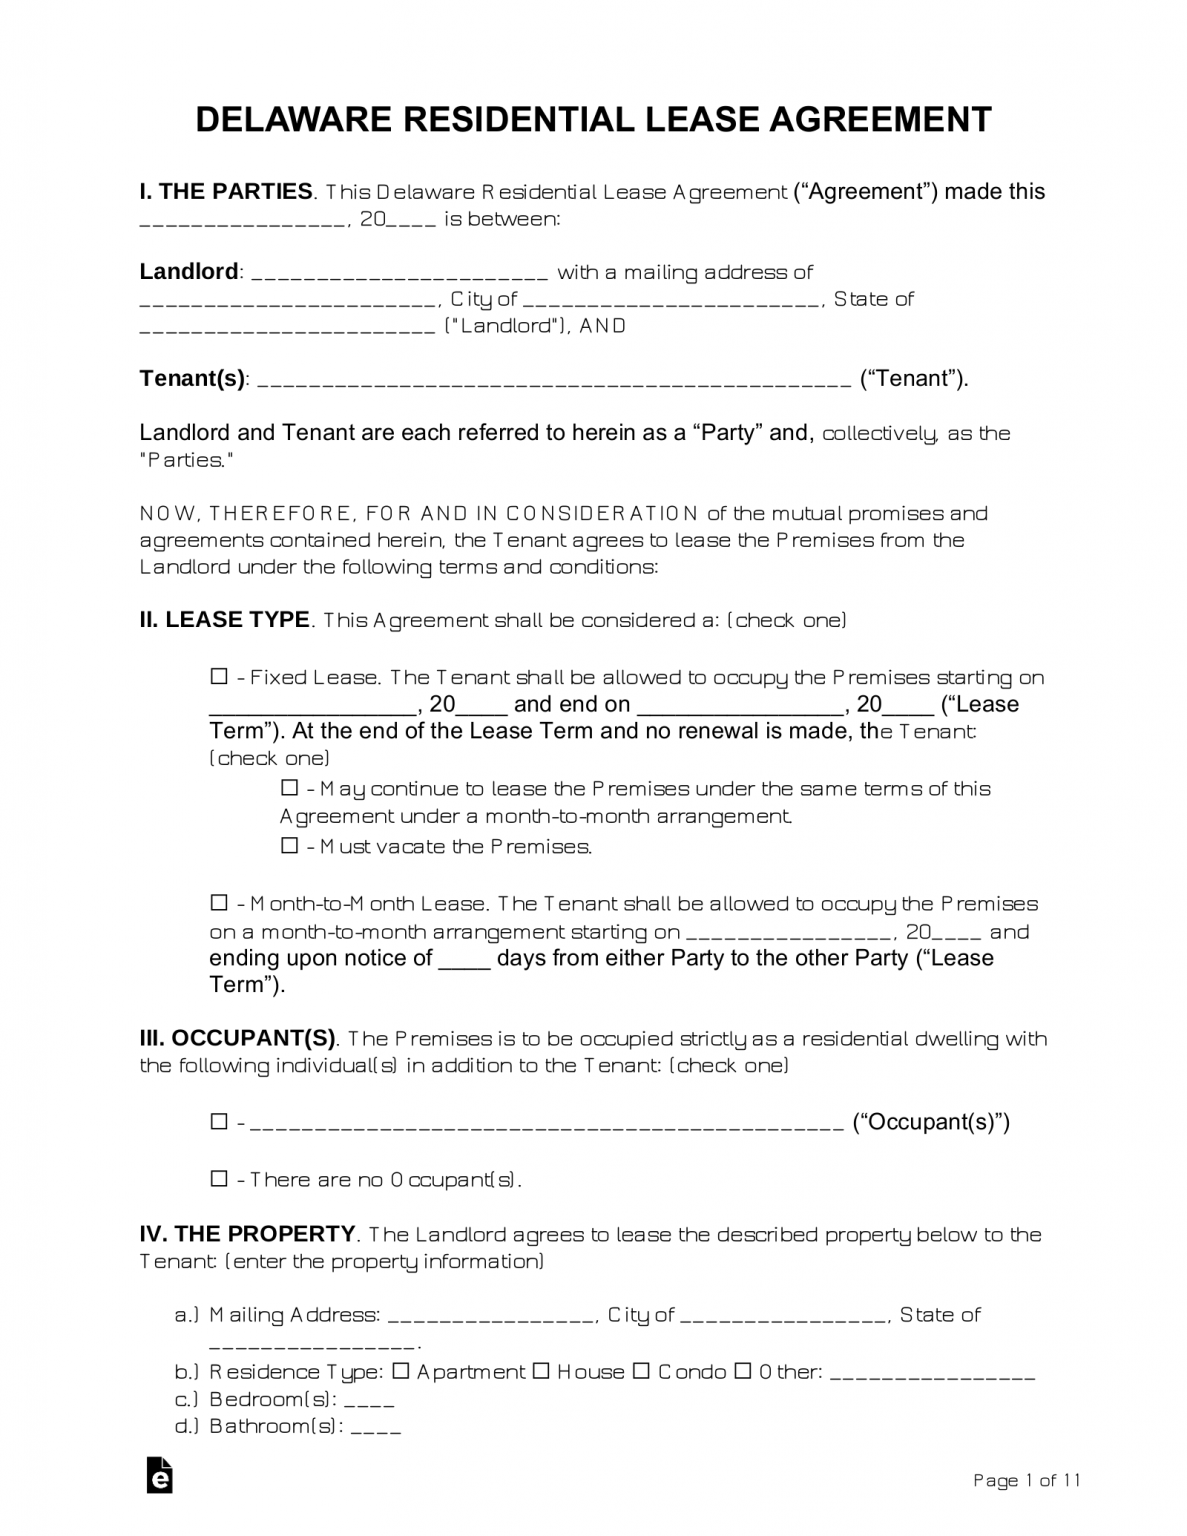 free-delaware-lease-agreement-templates-6-pdf-word-eforms